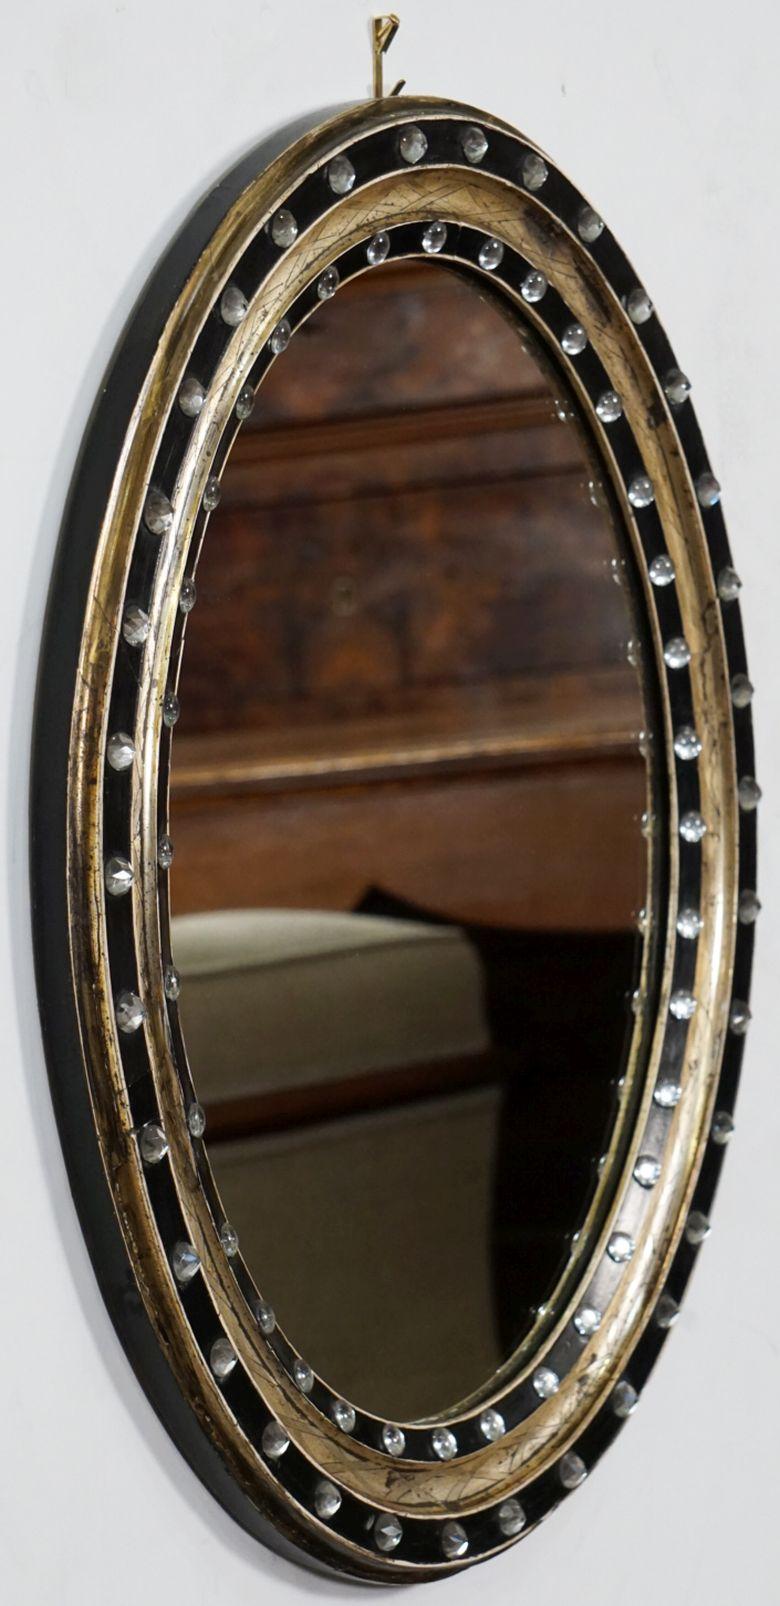 A fine Irish oval wall mirror from the 19th century, featuring a distinctive frame of alternating raised ebonized slips with original faceted glass stud decorations (Waterford border beads), separated by gilded and X-decorated recesses.

Measures: H